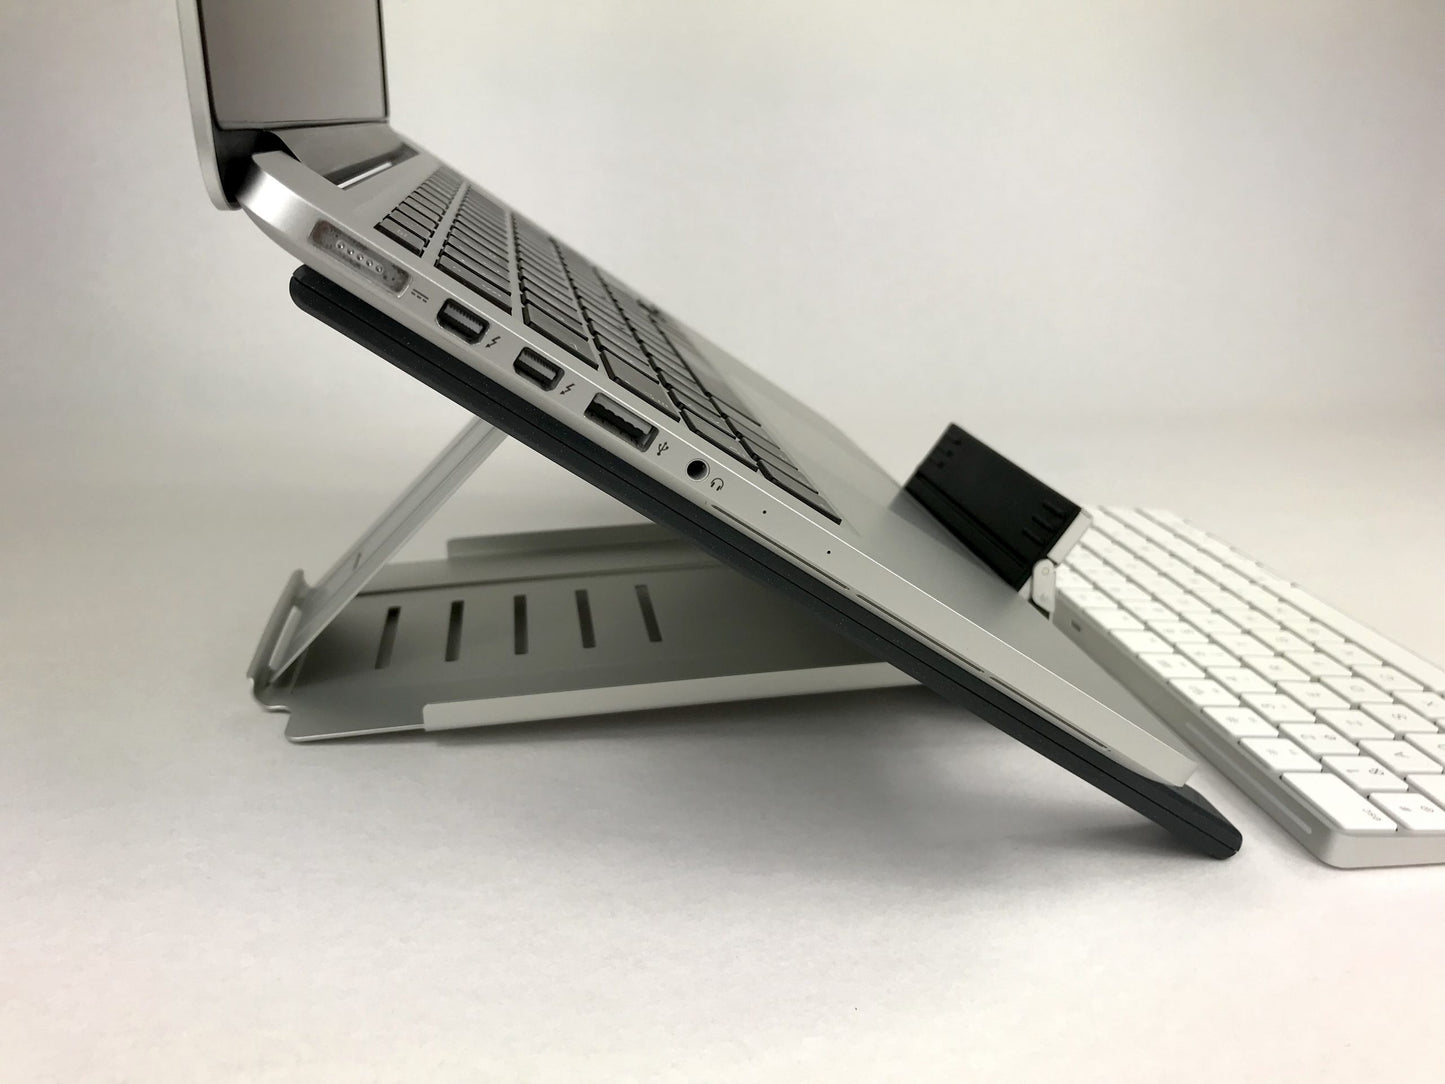 PRO ERGO STAND - ingenious design stand solution for laptop, iPads or tablets